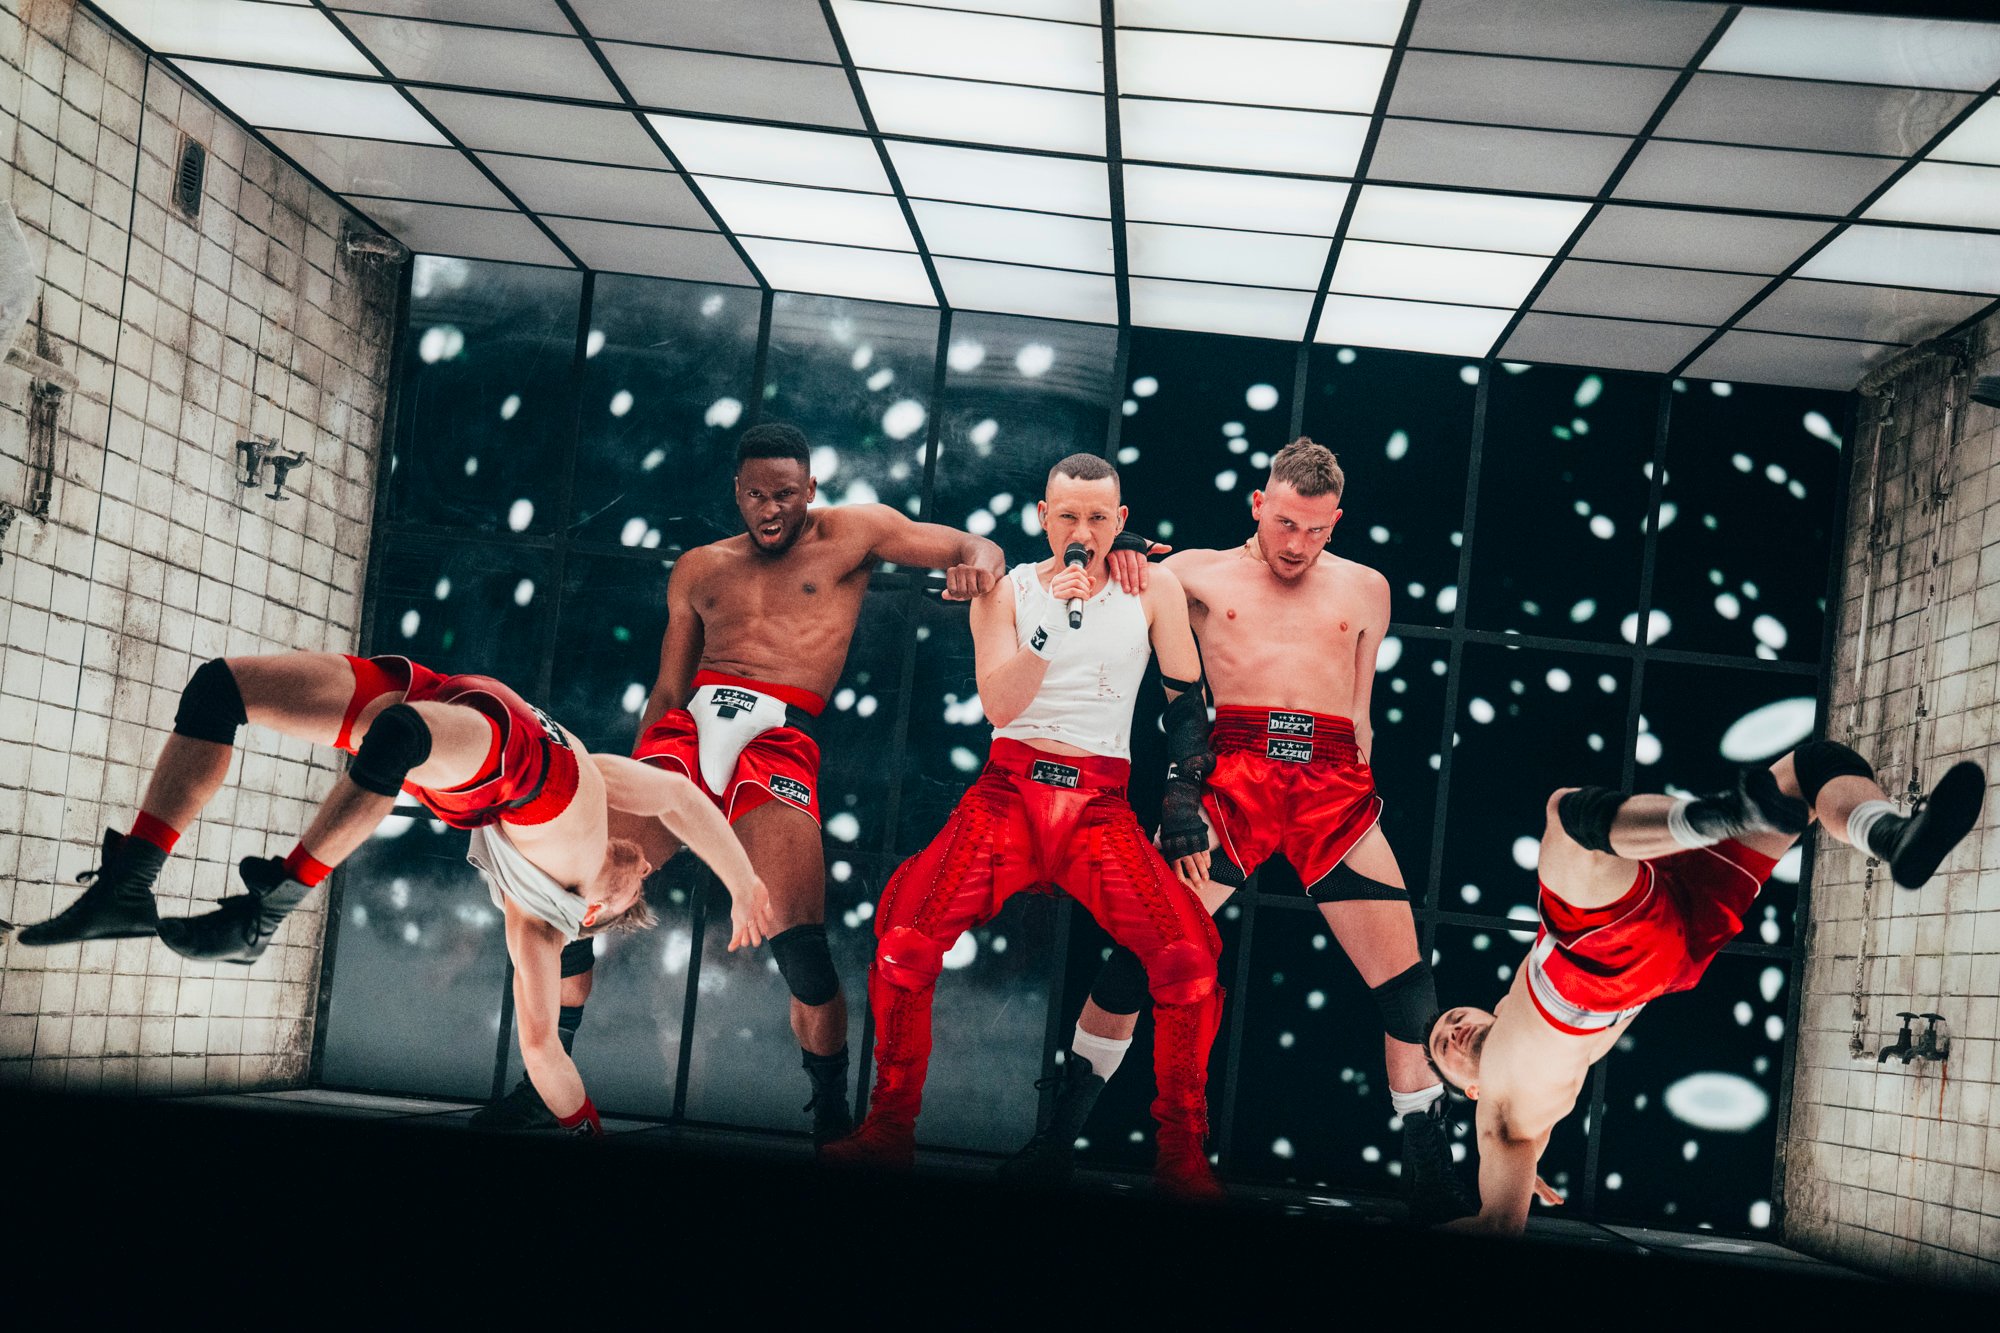 Bish Bash Bosh! Olly Alexander takes to the stage in Malmö for his first Eurovision rehearsal